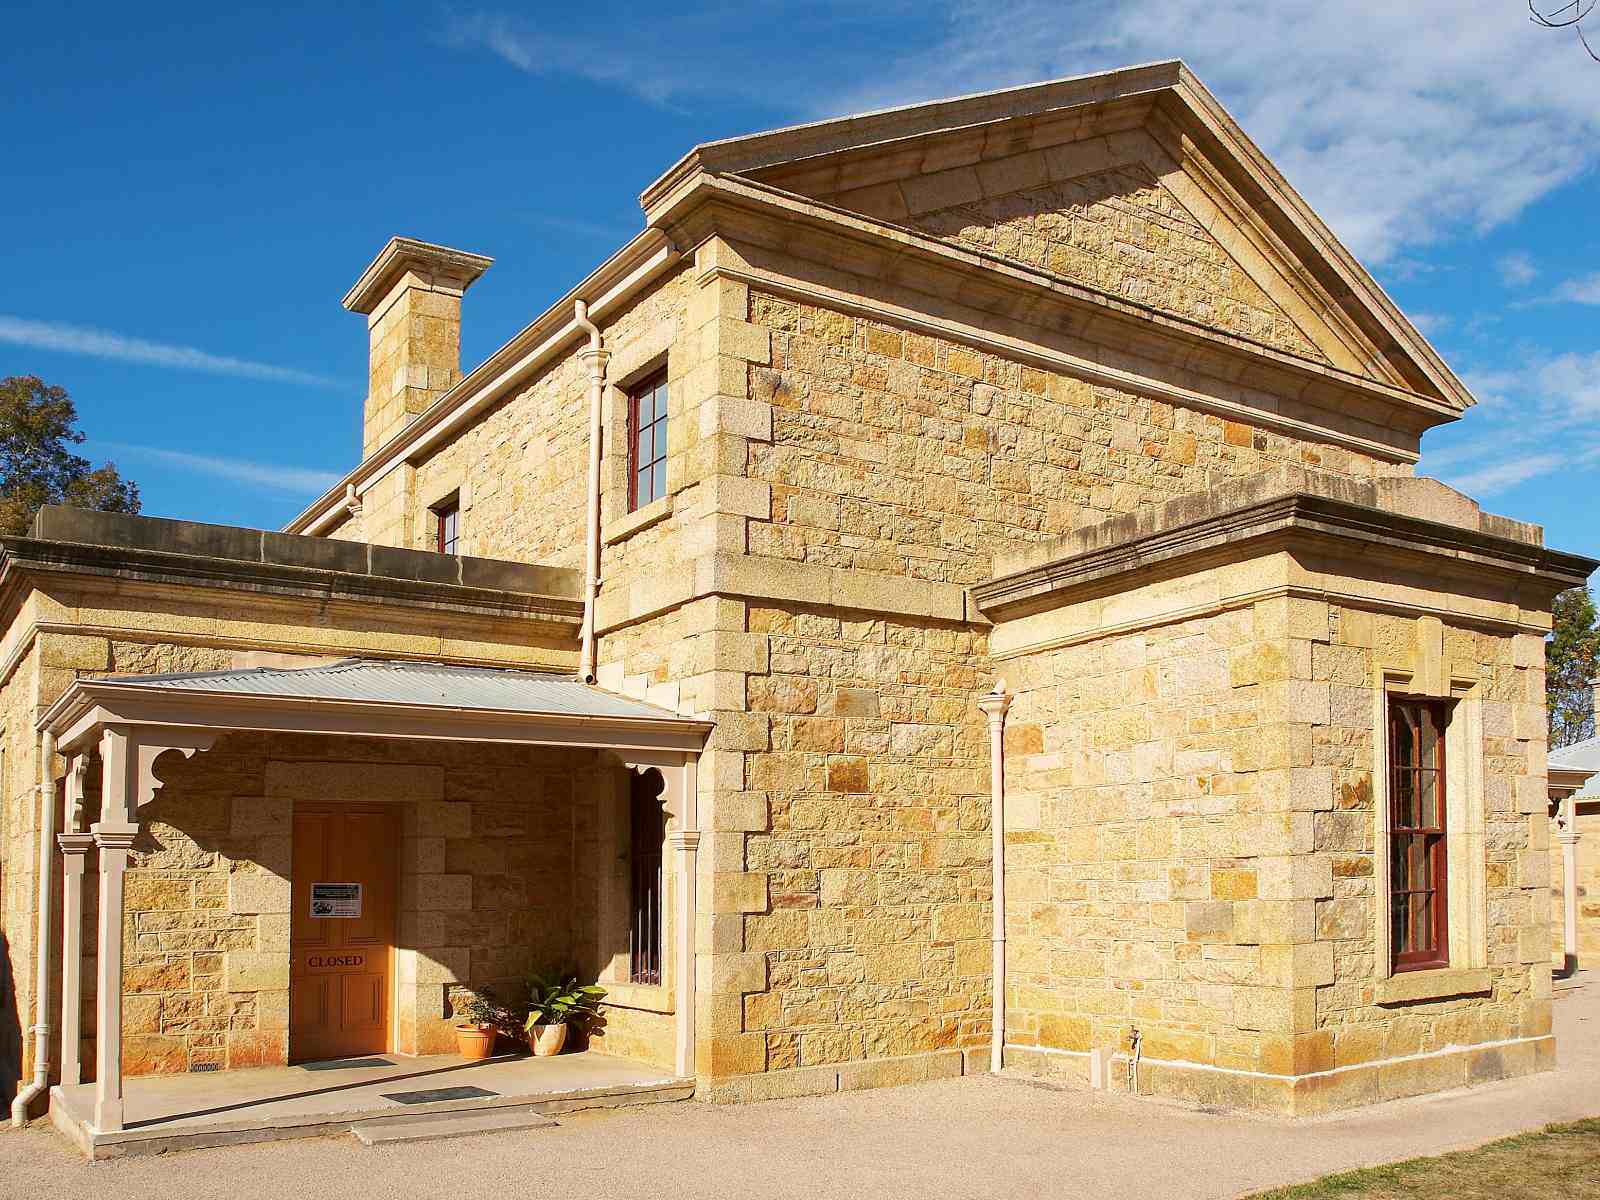 Beechworth Historic Courthouse - Victoria's High Country